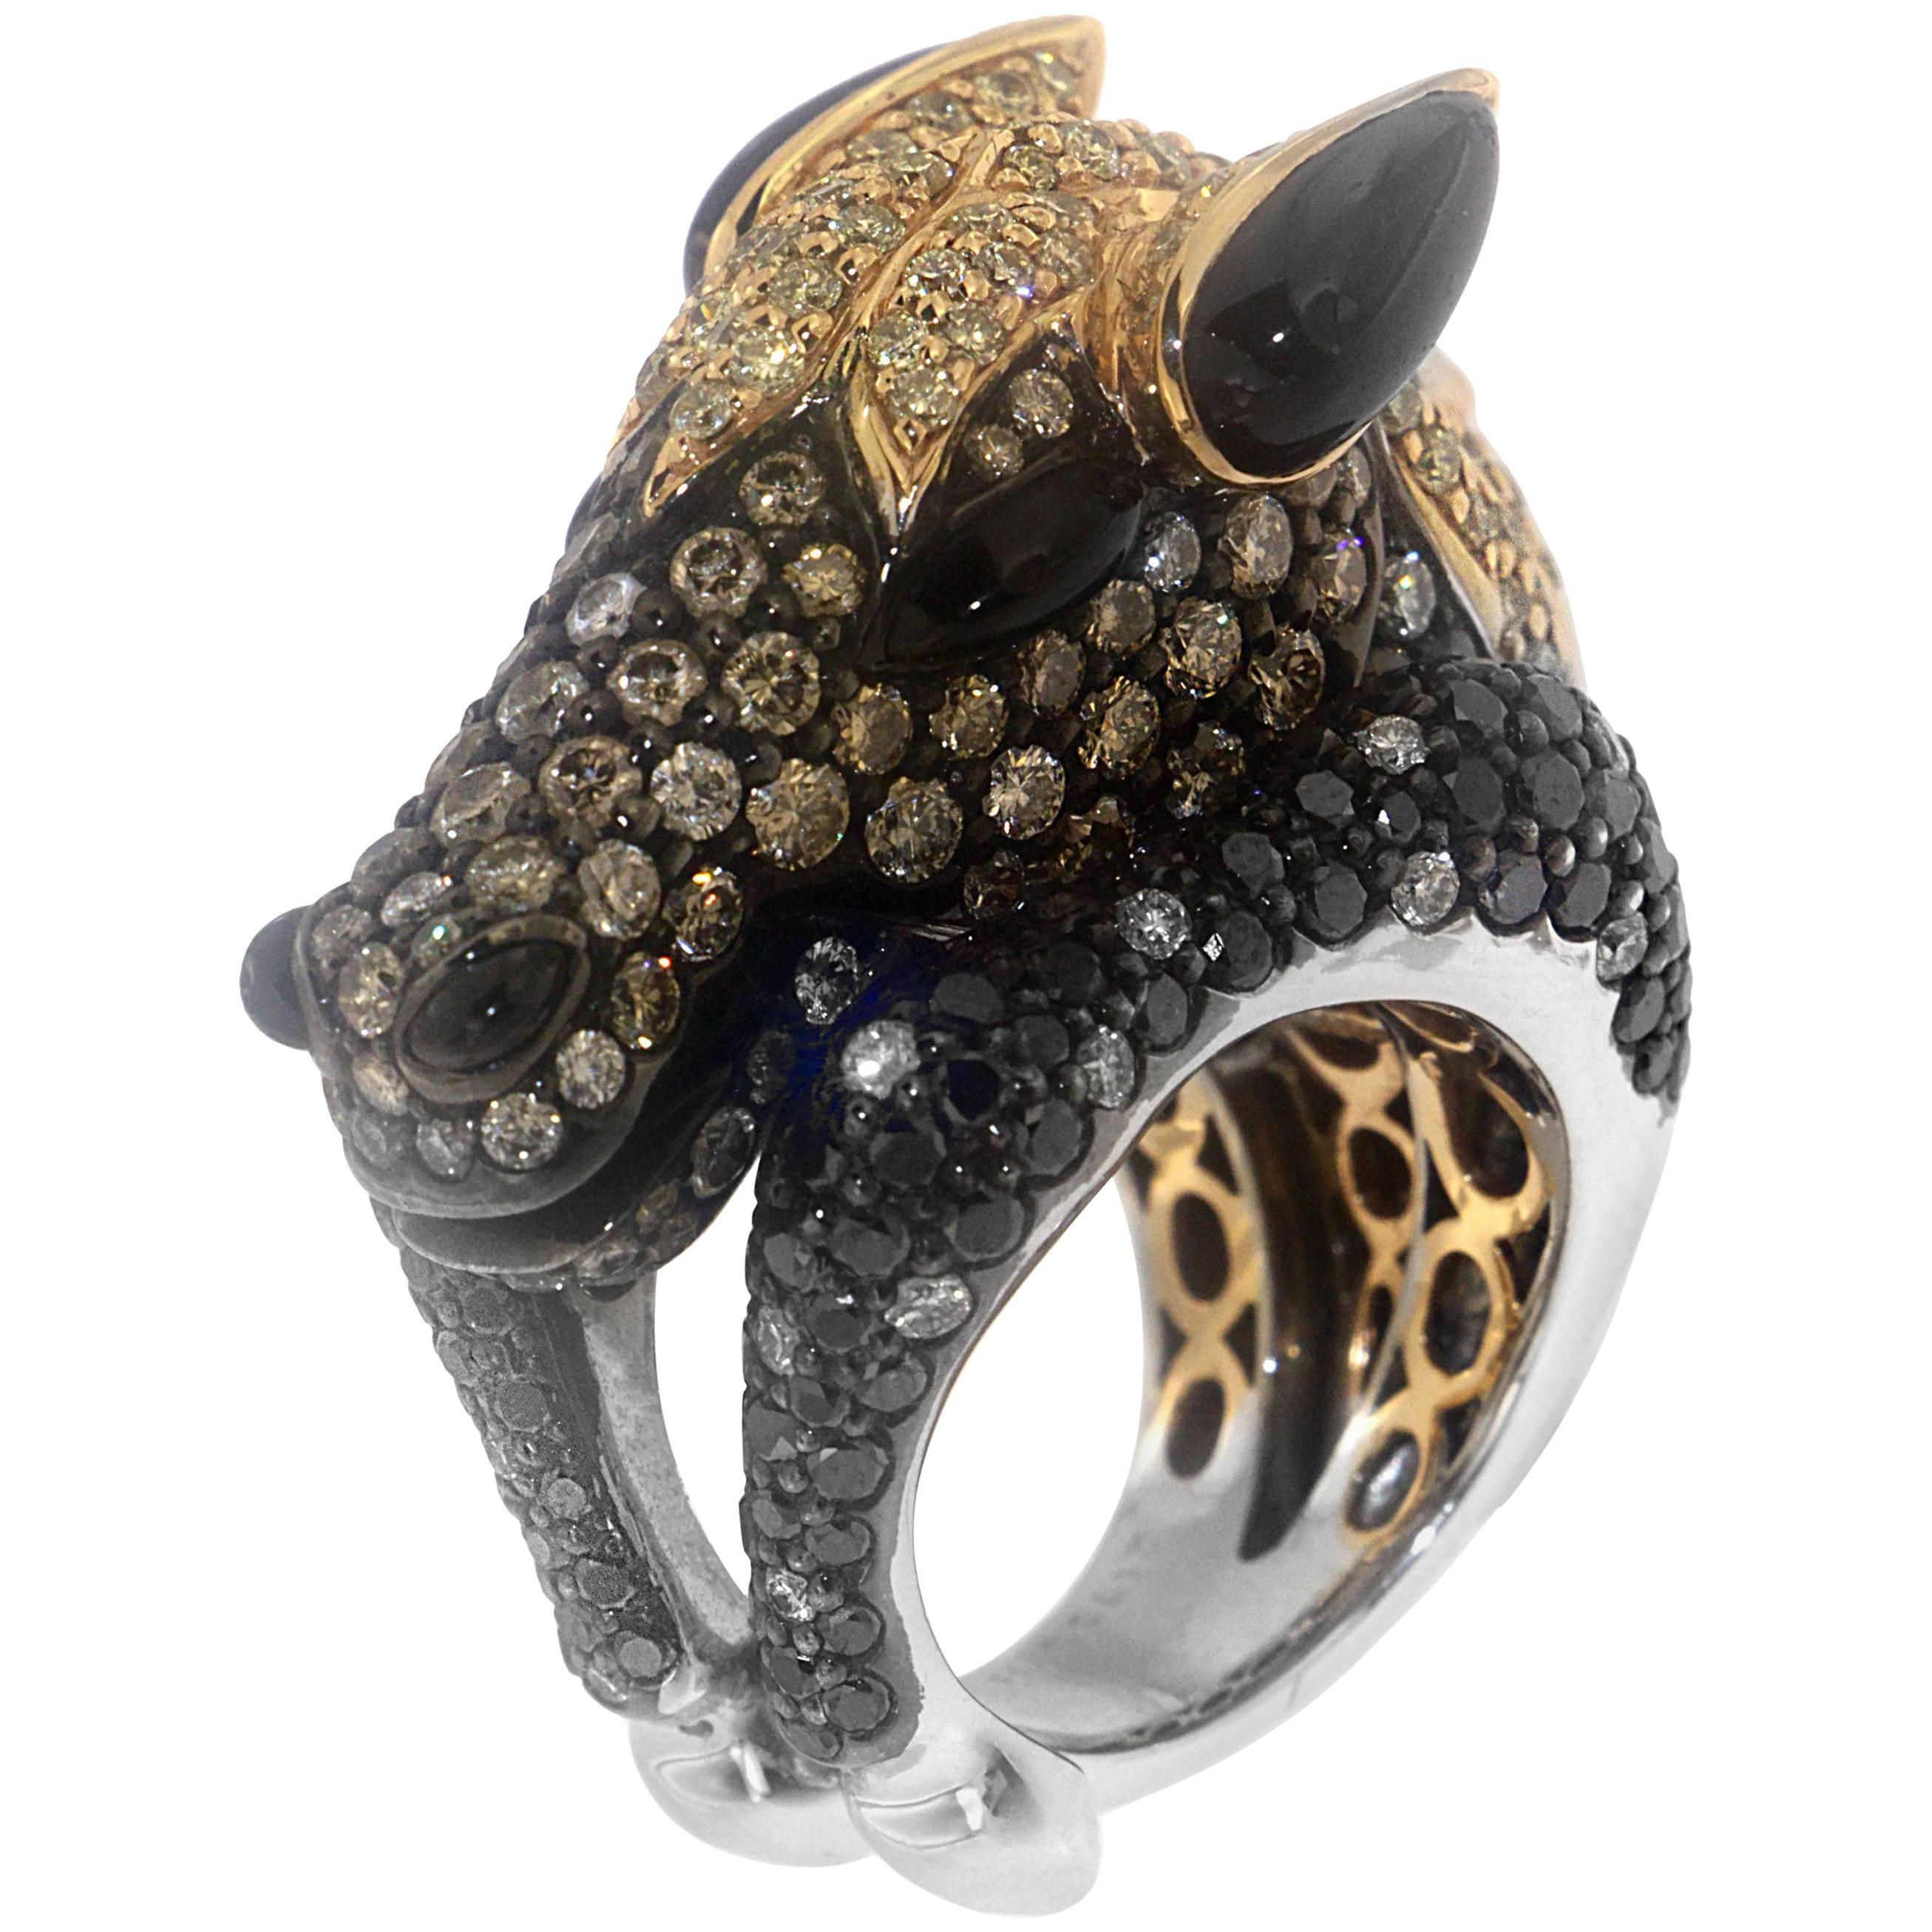 Zorab Creation Stallion Horse Spinel Cocktail Ring with Diamonds